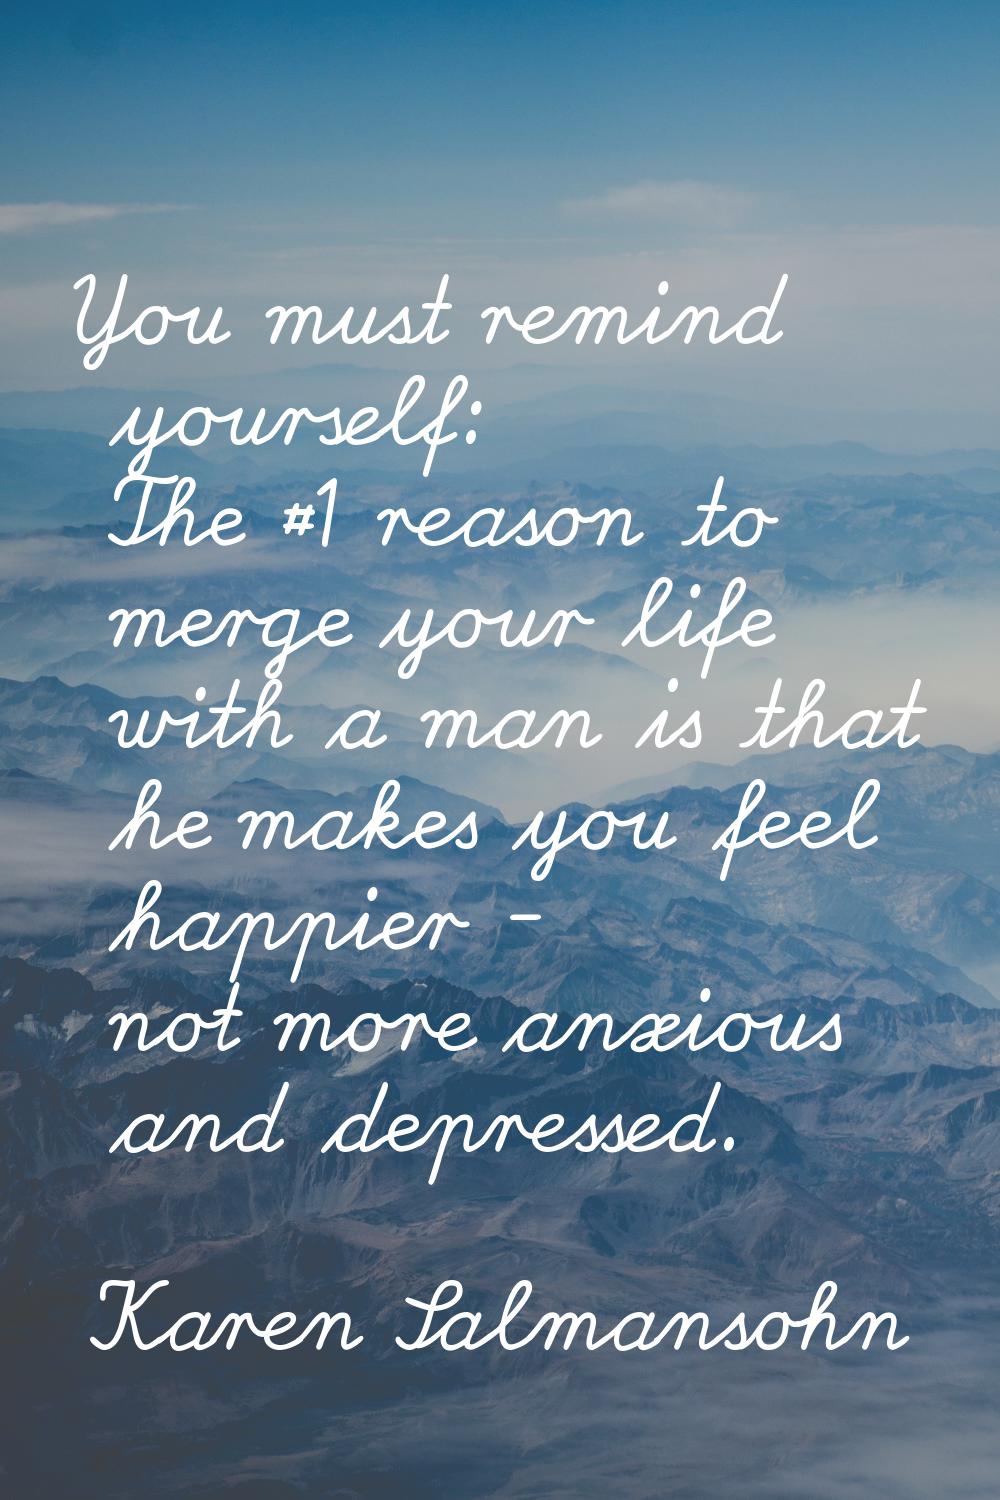 You must remind yourself: The #1 reason to merge your life with a man is that he makes you feel hap